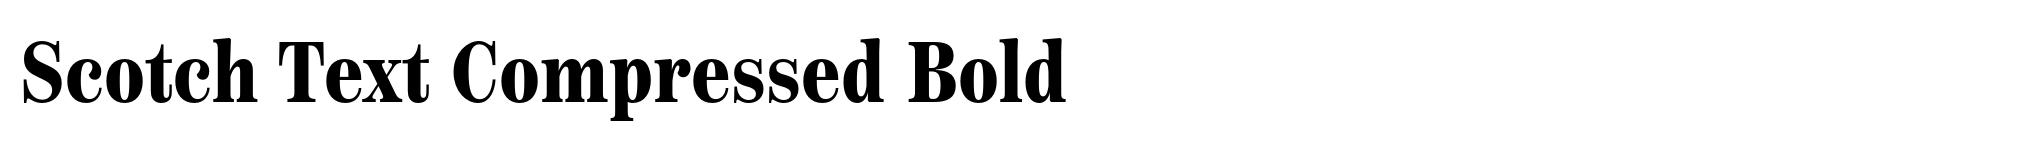 Scotch Text Compressed Bold image